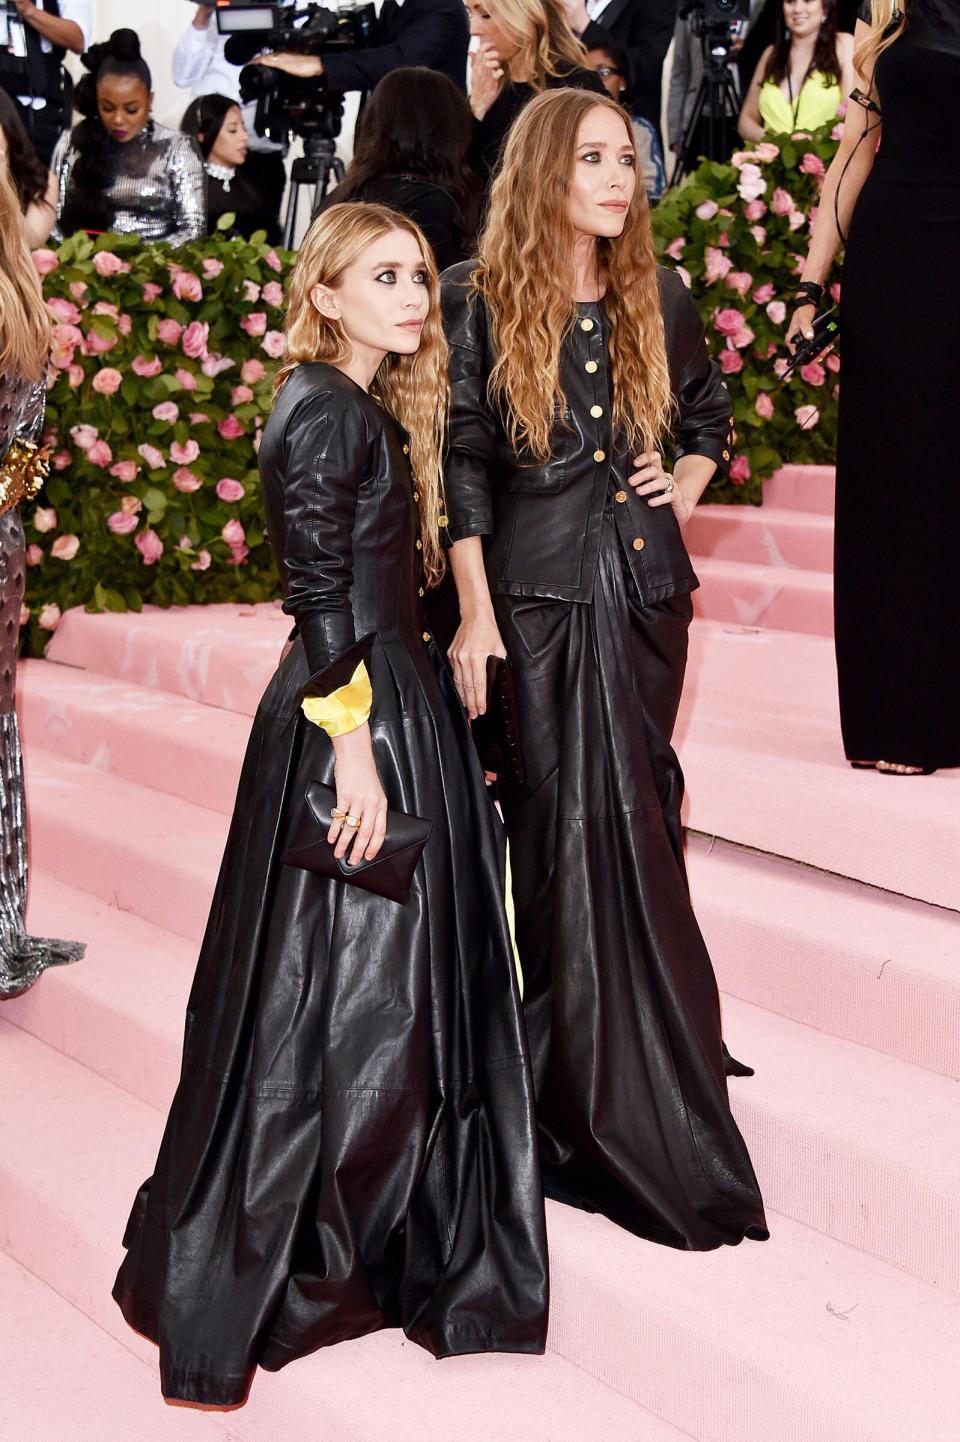 The Olsen Twins Did Their Own Mood-Serving Thing in Matching Leather at the 2019 Met Gala